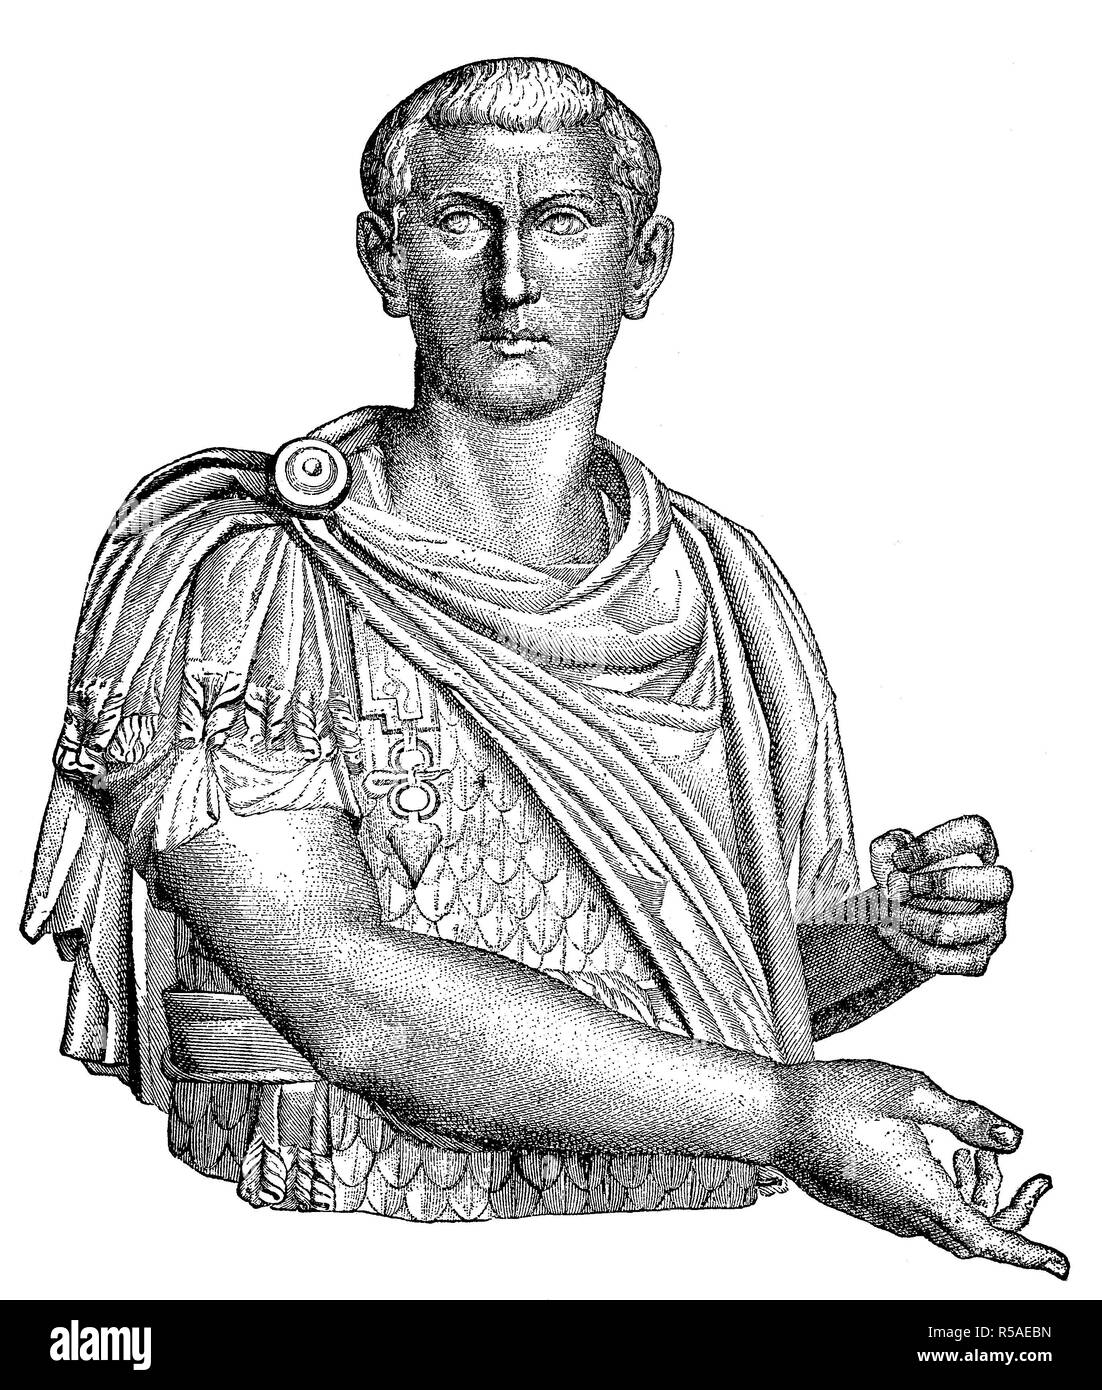 The marble bust of Marcus Antonius Gordianus, 20 January 225, 244, known as Gordian III., was from 238 to 244 Roman emperor Stock Photo